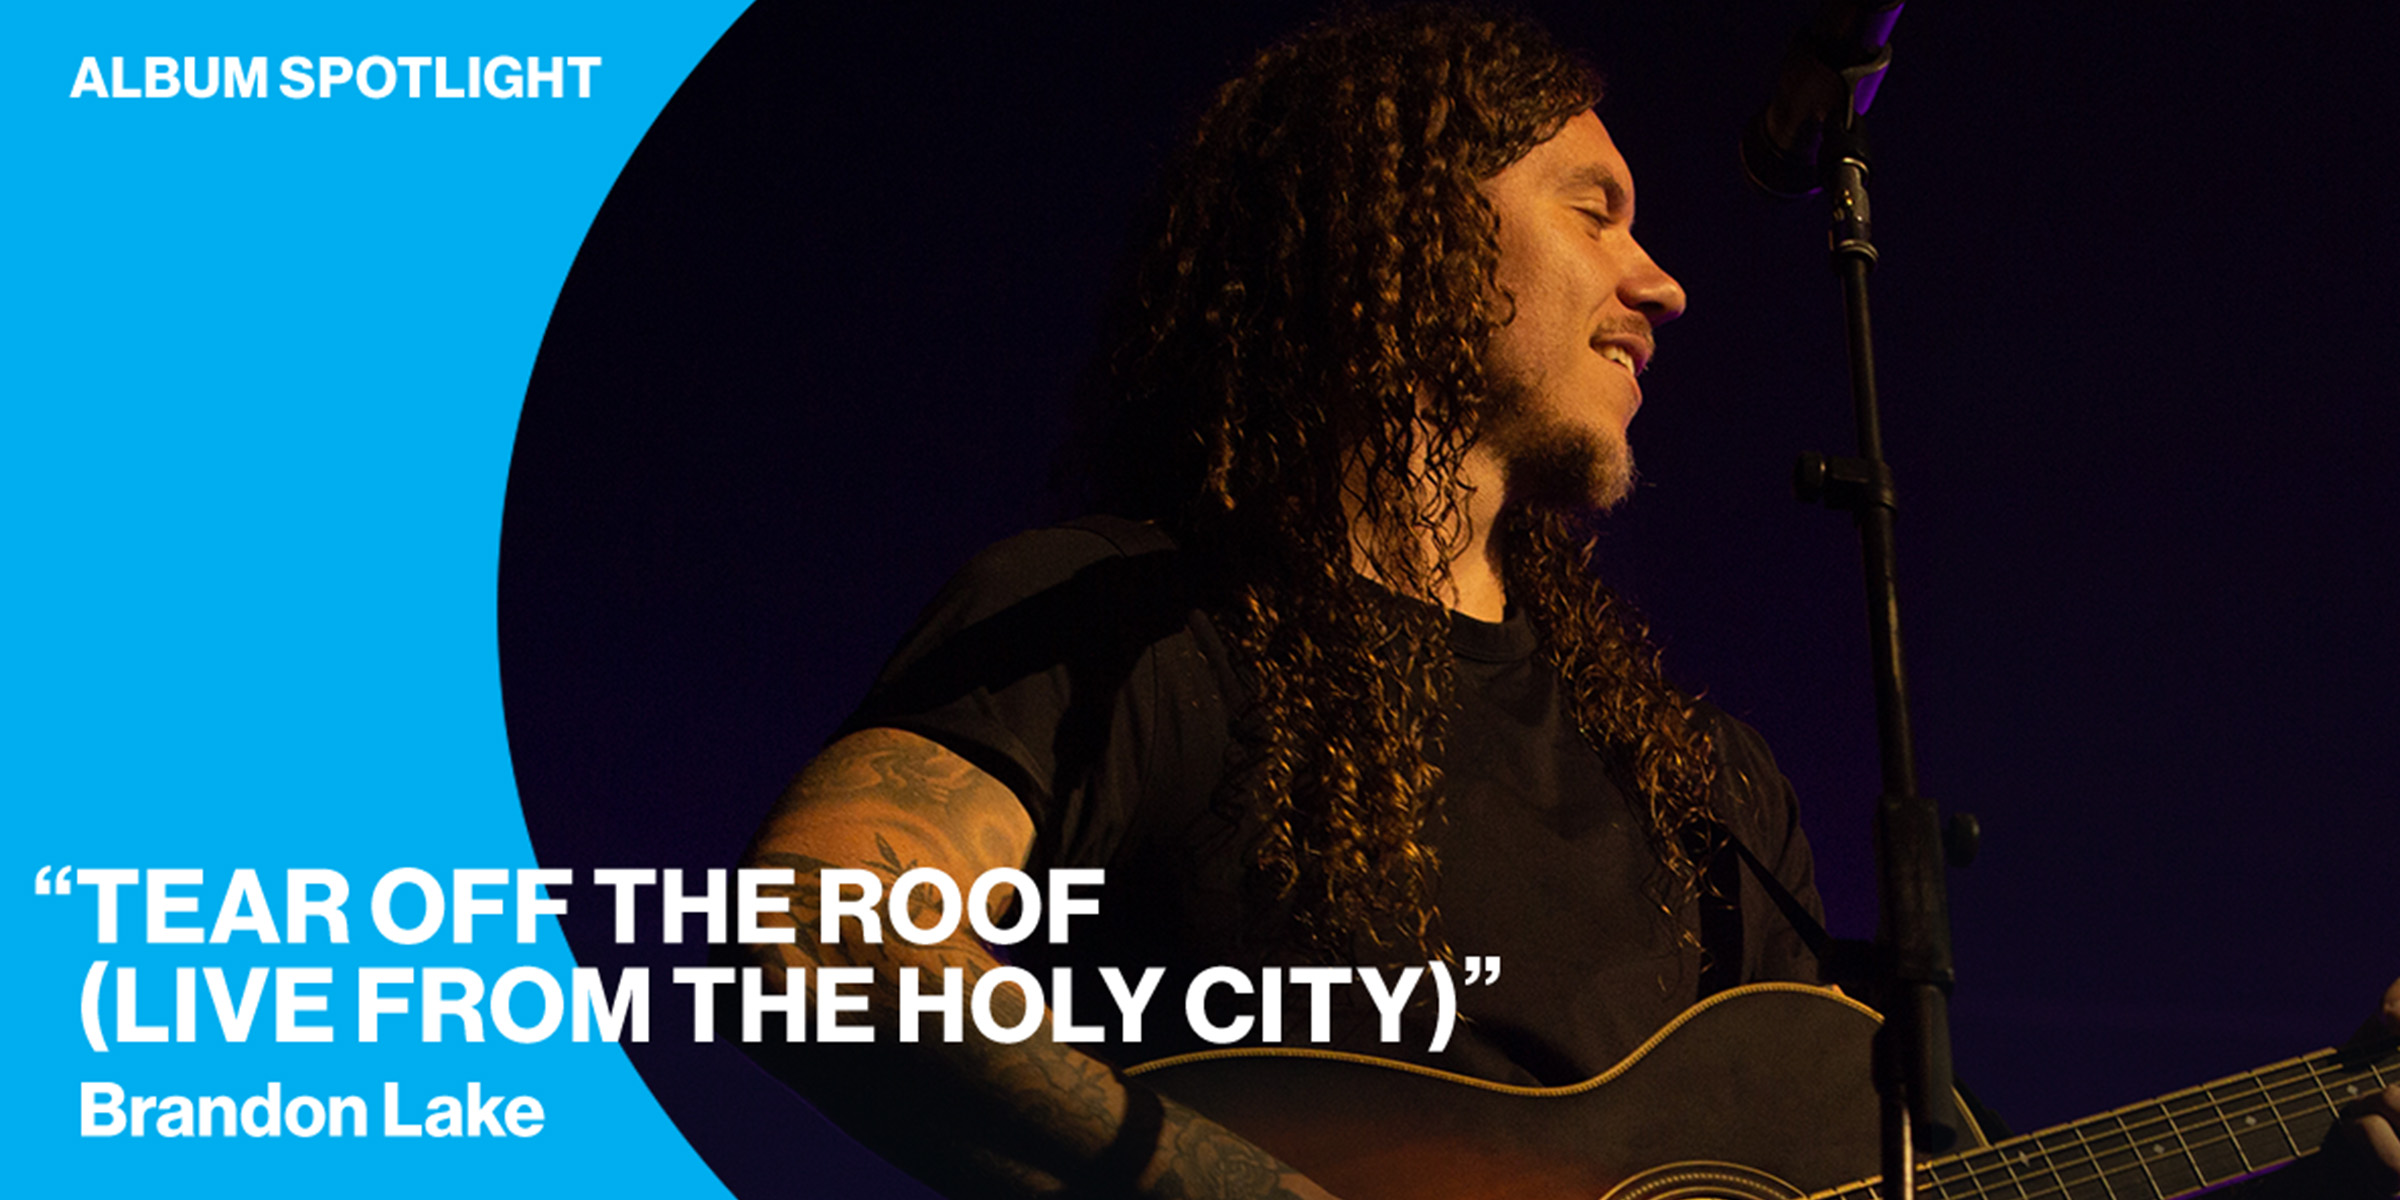 Album Spotlight: "Tear Off the Roof (Live from the Holy City)" Brandon Lake